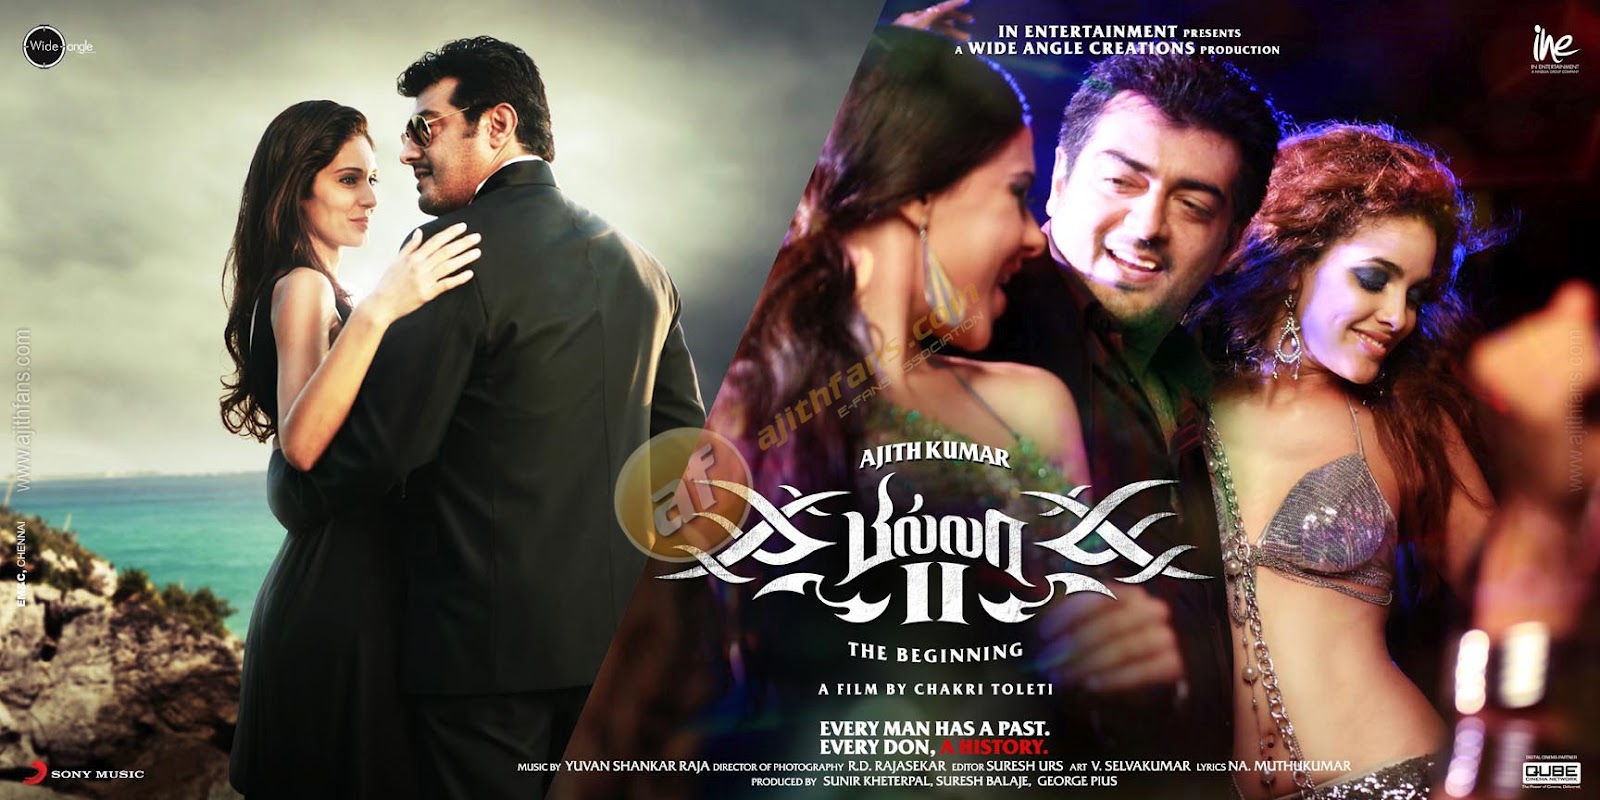 Tamil Movie Billa 2 1600x800 Wallpaper Teahub Io Check out the latest news about ajith kumar's billa 2 movie, story, cast & crew, release date, photos, review, box office collections and much more only on parvathi omanakuttan will play the love interest of david billa in this film. tamil movie billa 2 1600x800